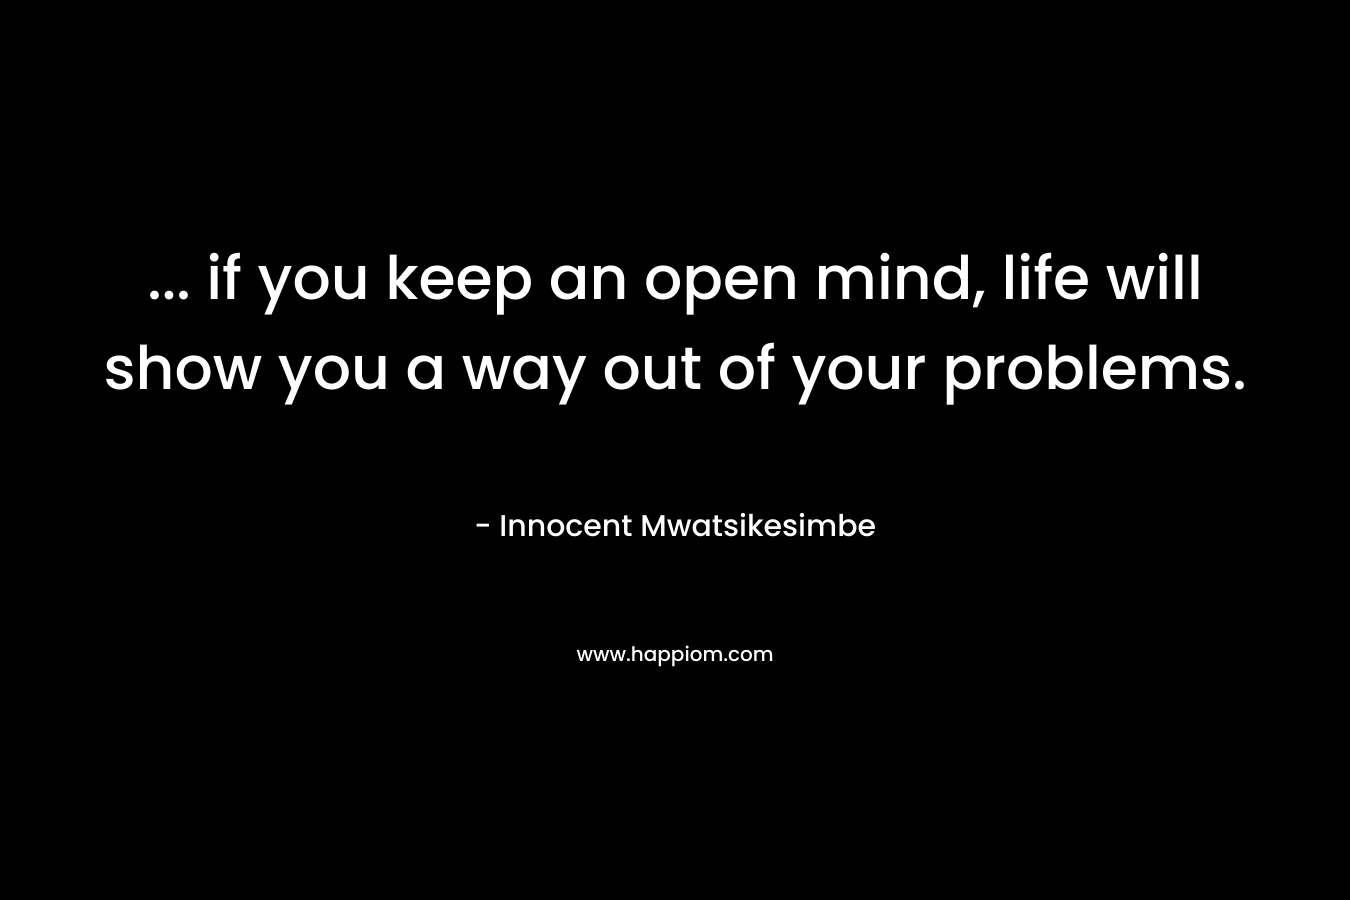 ... if you keep an open mind, life will show you a way out of your problems.